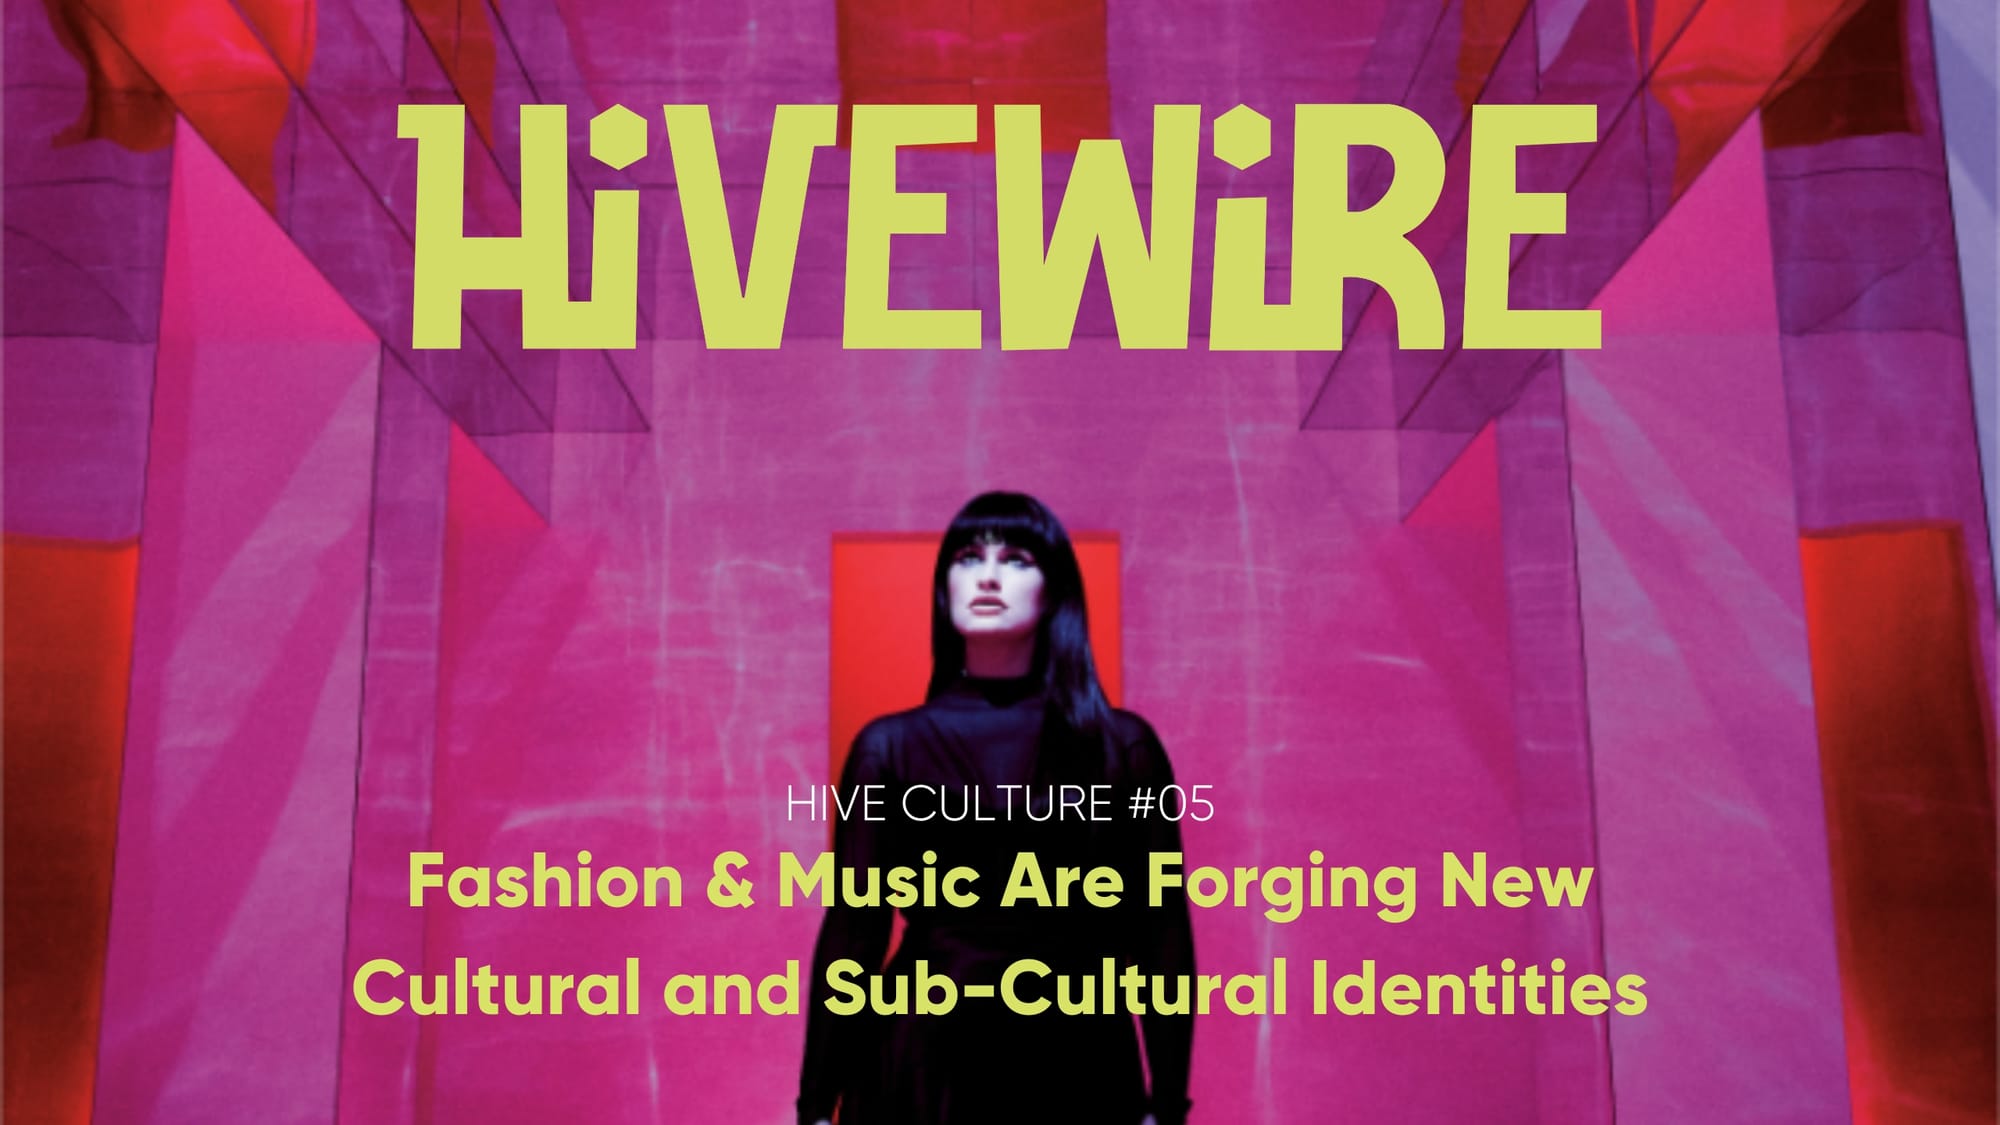 HIVE CULTURE #05 - Fashion & Music Are Forging New Cultural and Sub-Cultural Identities